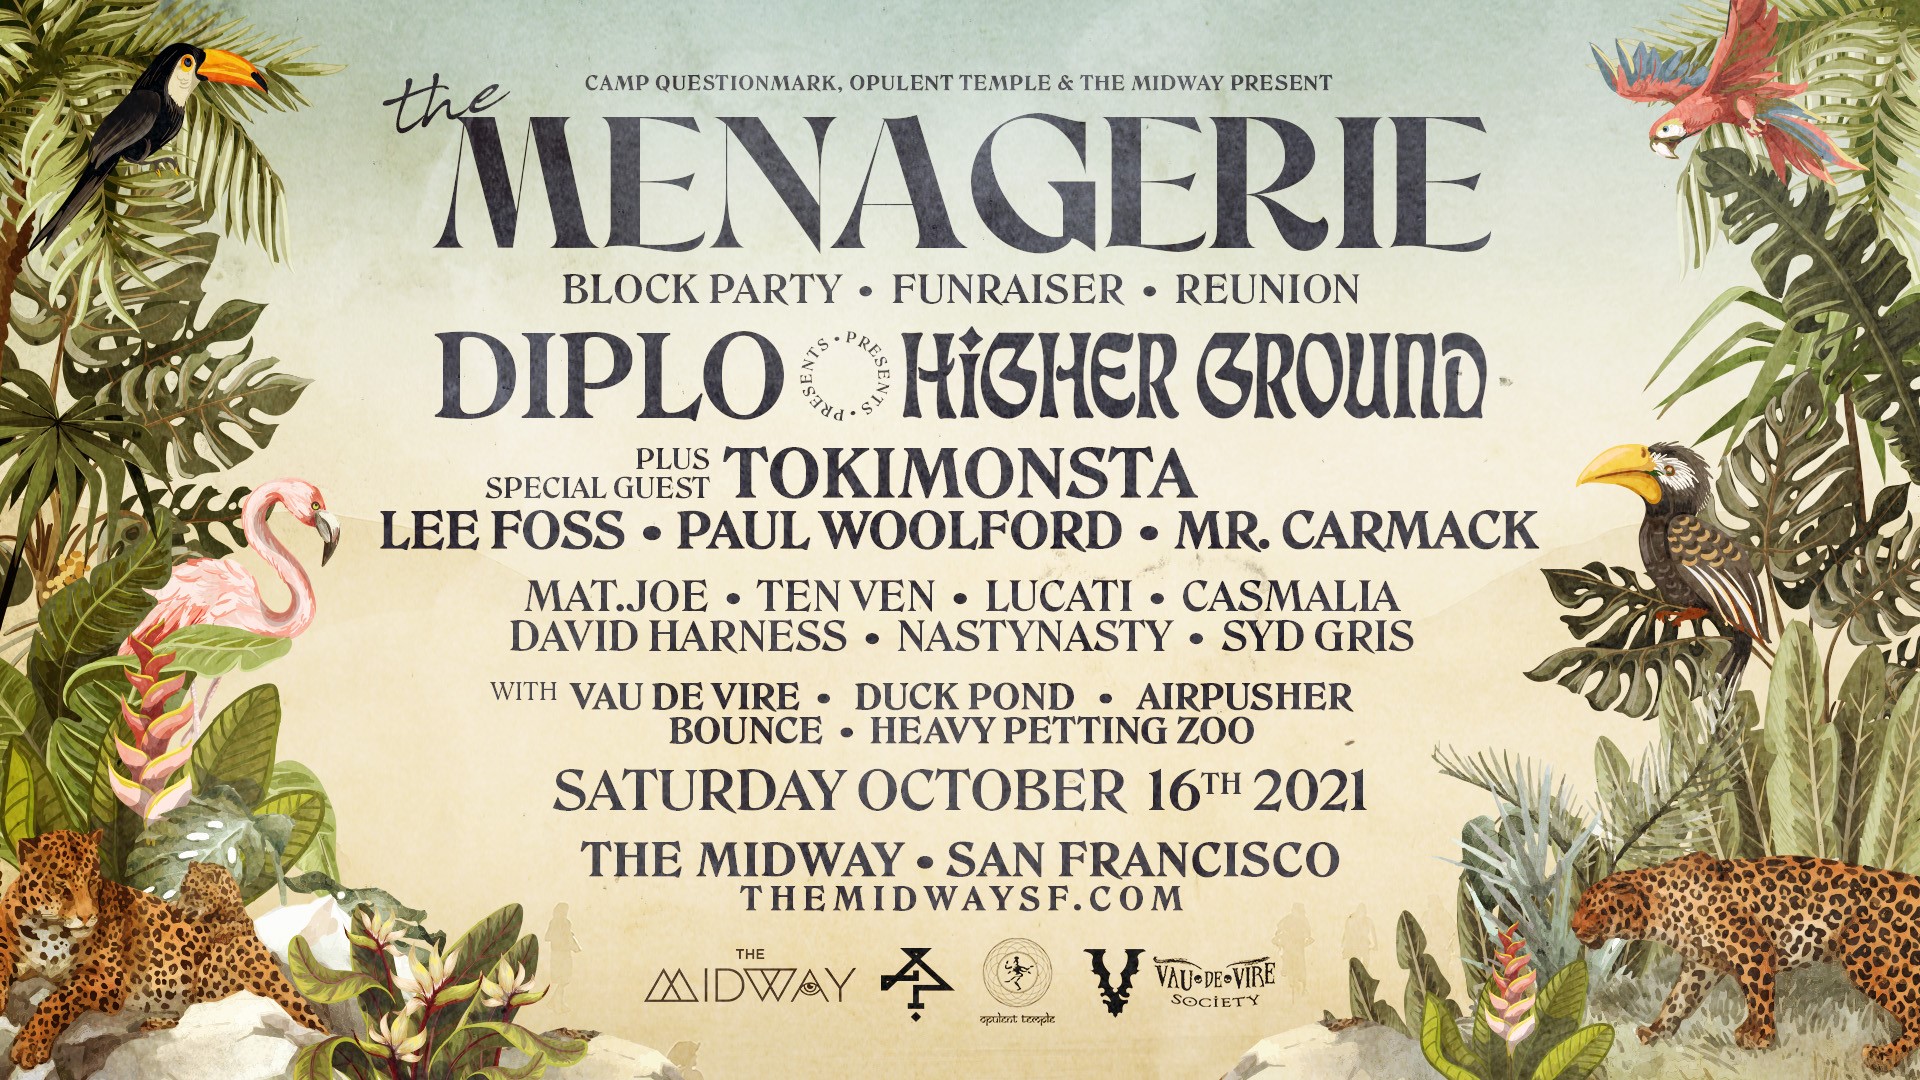 The Menagerie at The Midway ft. Diplo